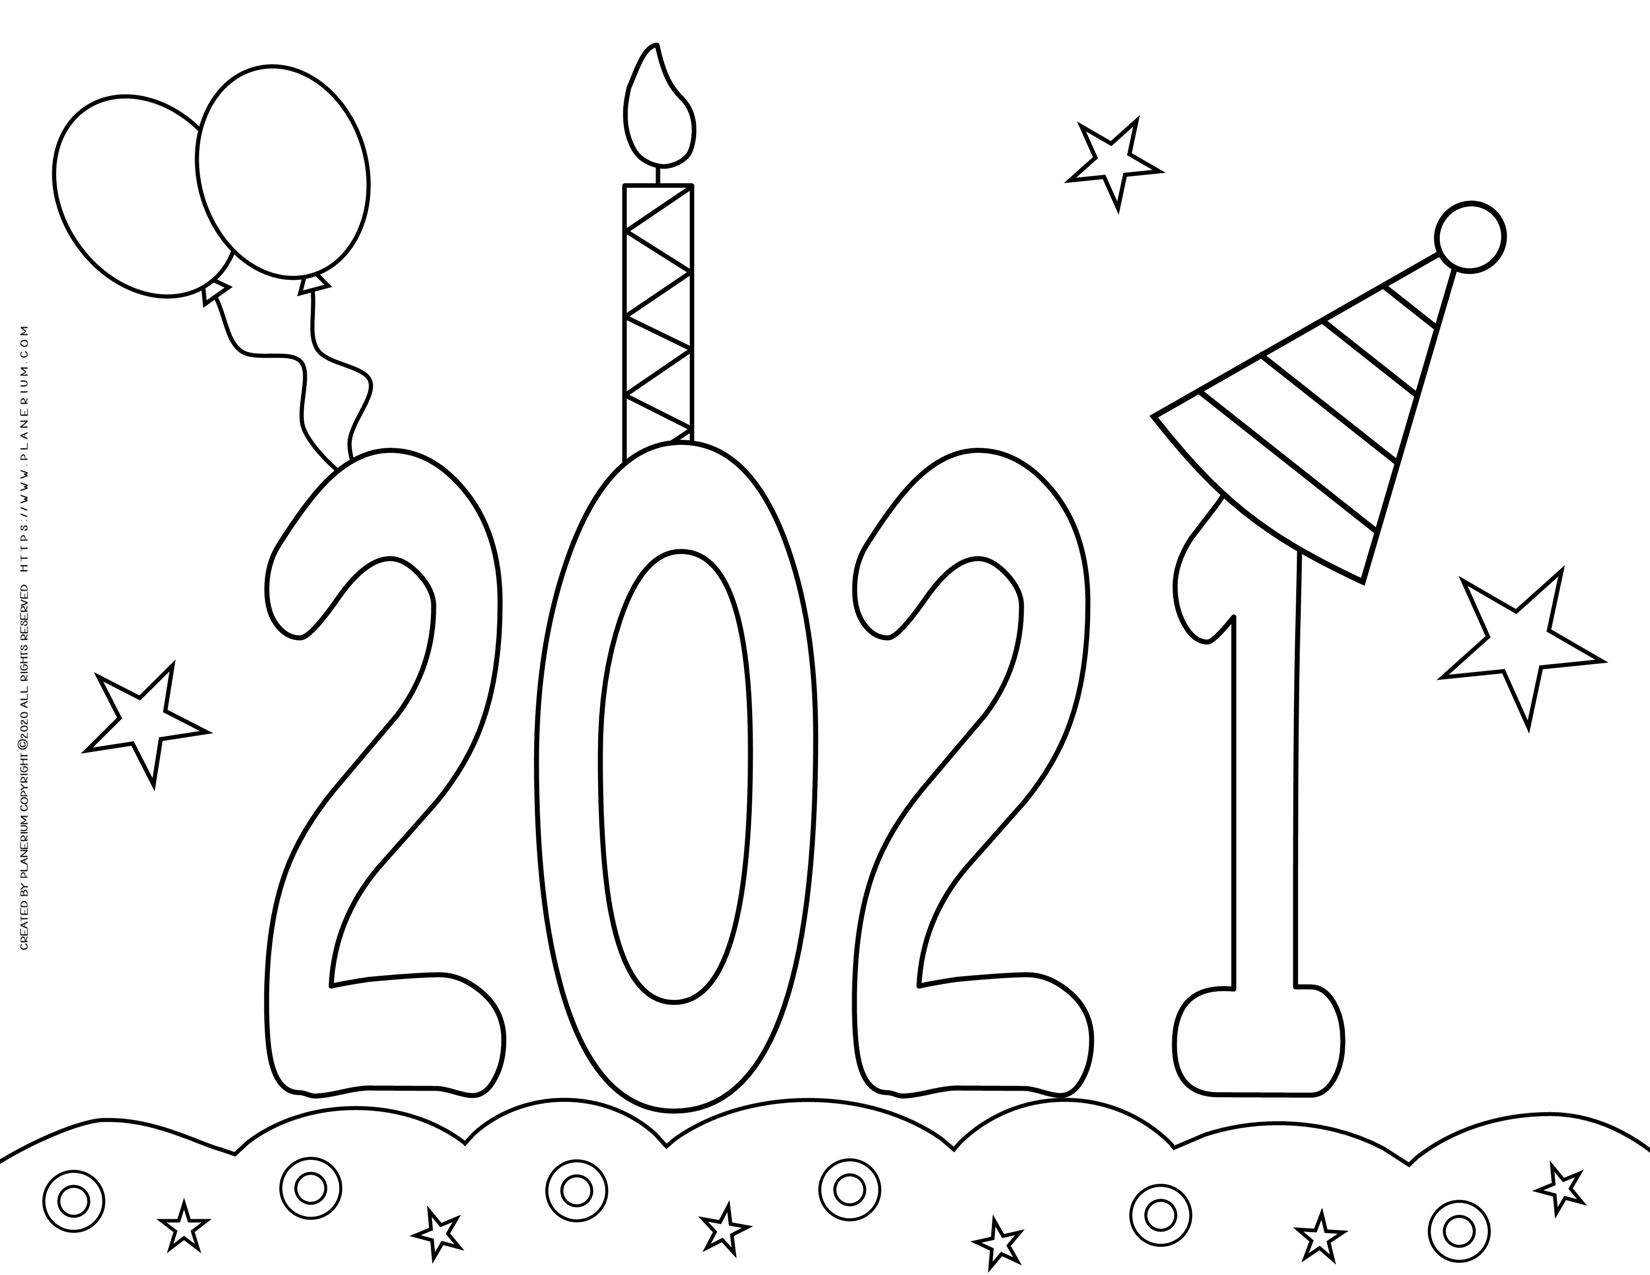 Download New Year Coloring pages - 2021 Celebration | Planerium